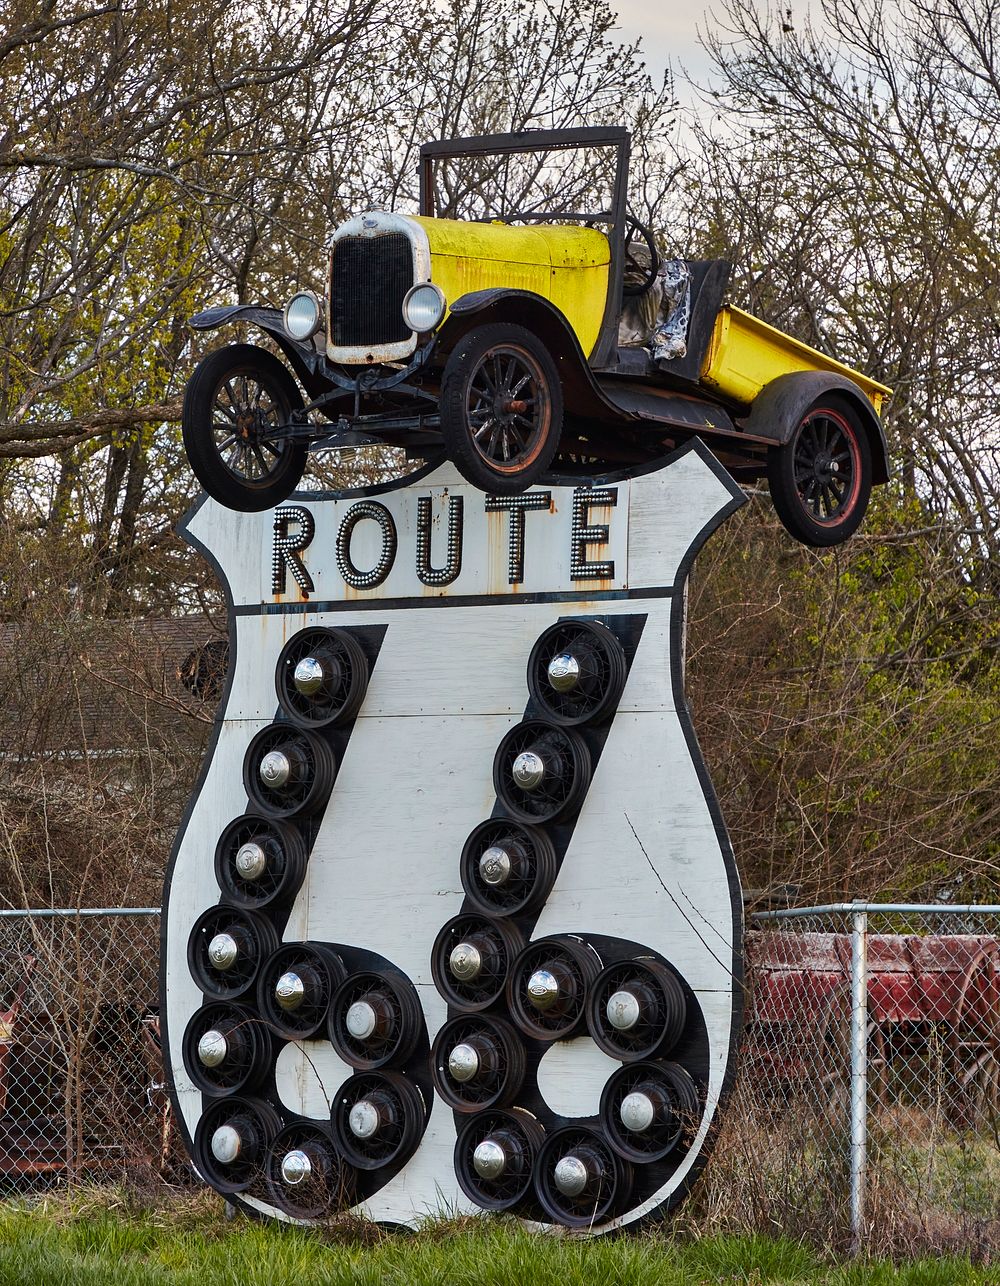                         An old but interesting truck is perched atop an illuminated sign for historic U.S. highway 66 in…